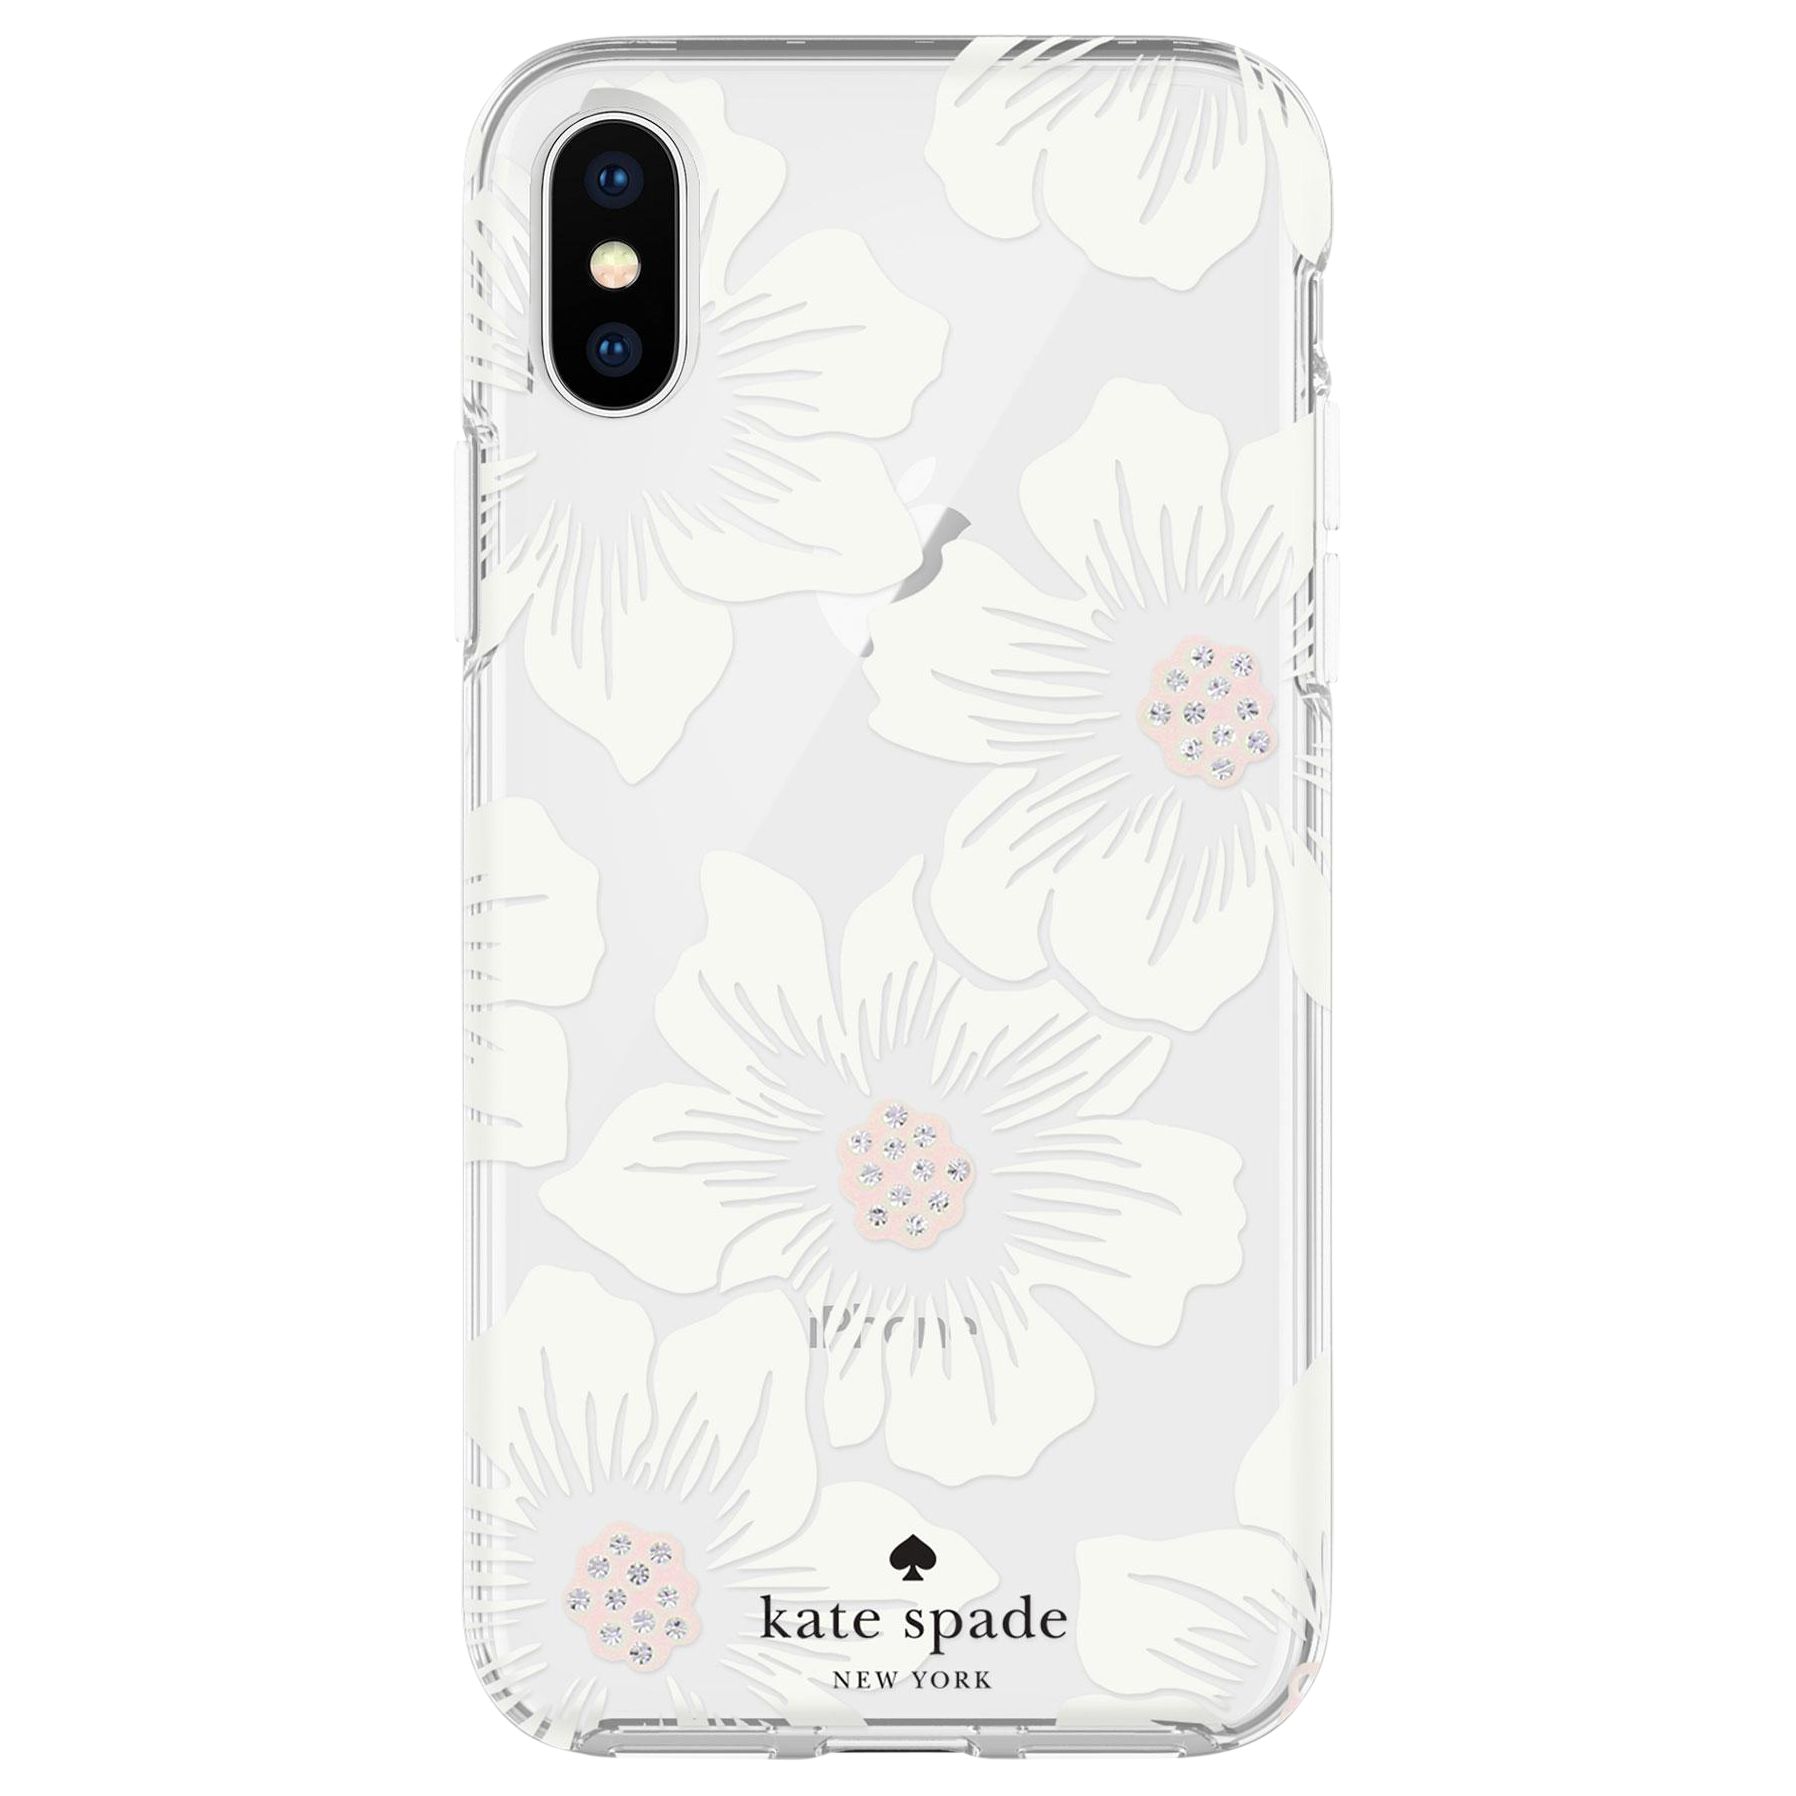 kate spade new york Floral Hard Case for iPhone X